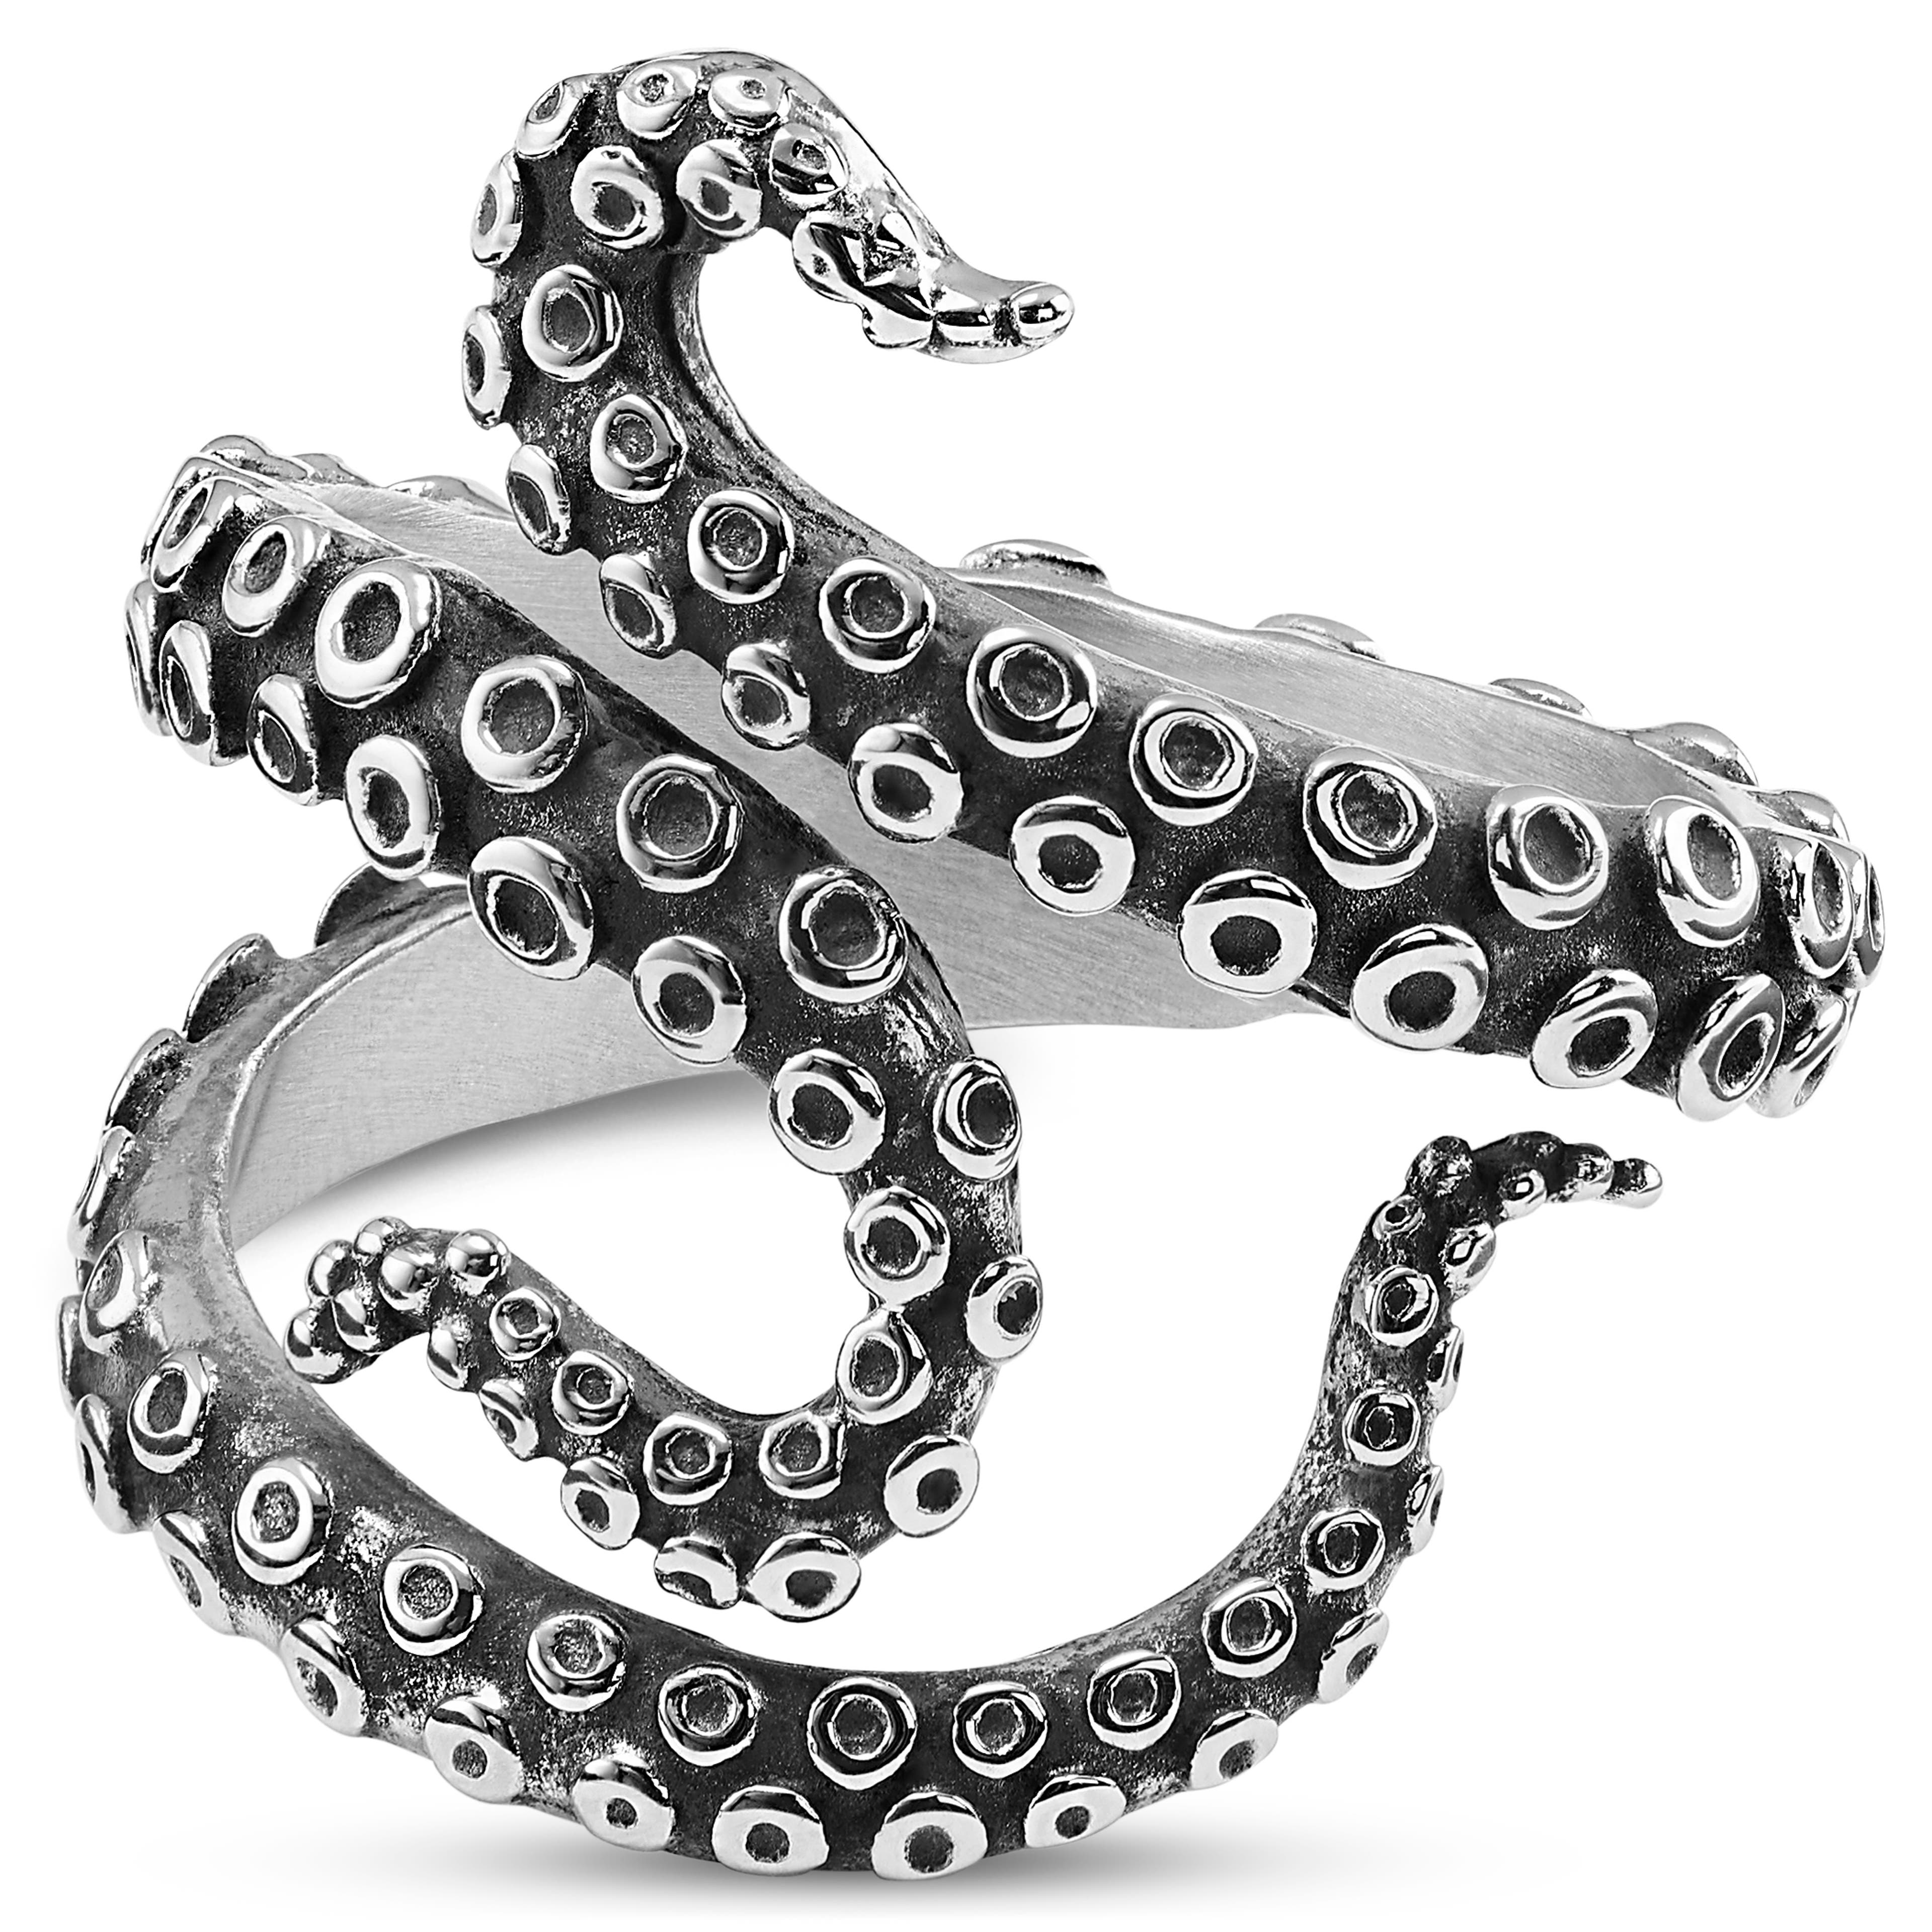 Silver-Tone Stainless Steel Octopus Tentacle Ring